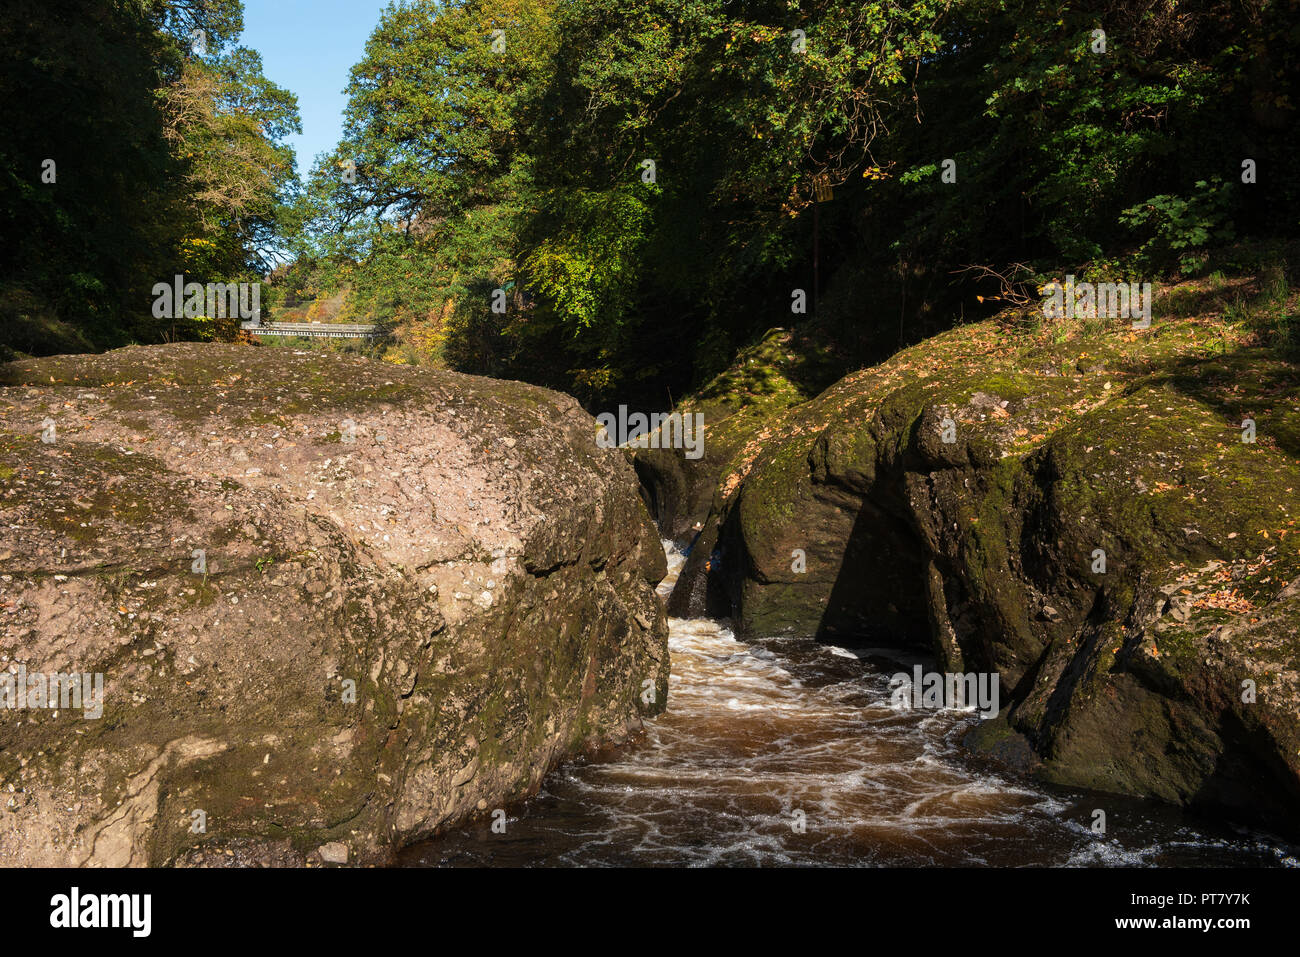 Cargill's Leap,where Rev.Donald Cargill jumped the River Ericht to escape King Charles II’s dragoons in 1665 , Blairgowrie, Perthshire, Scotland. Stock Photo